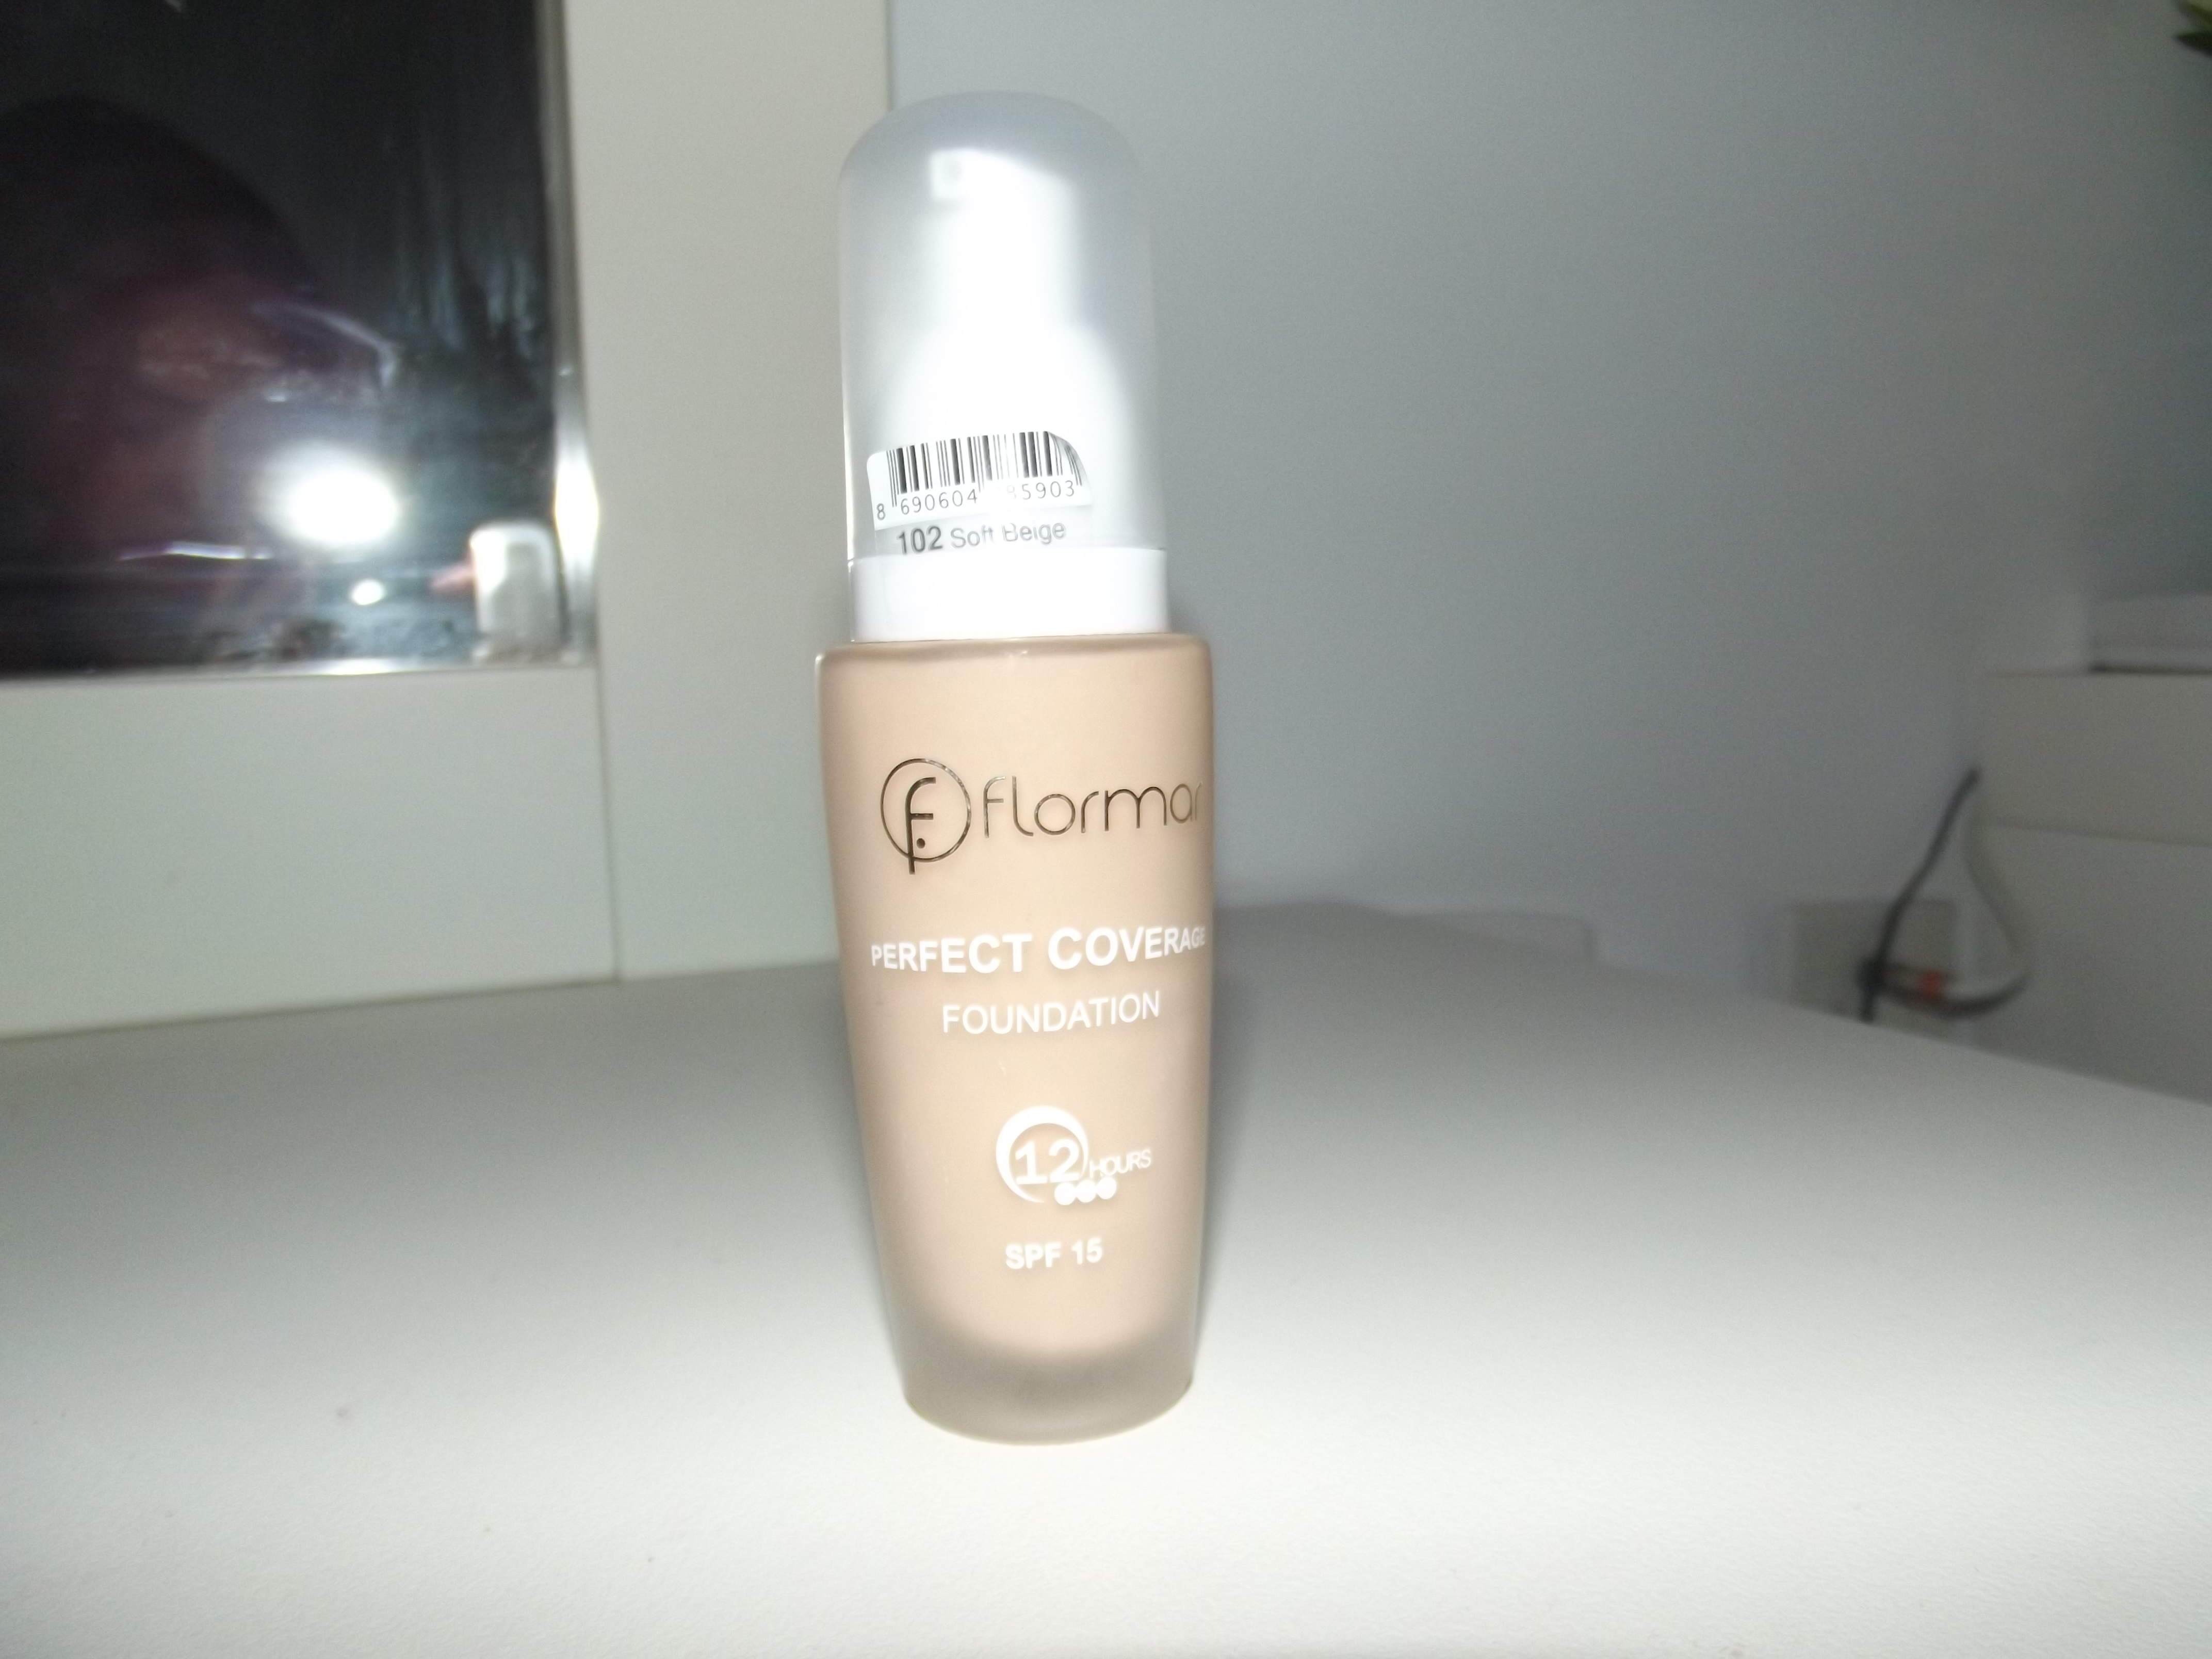 Flormar “12 HR Perfect Coverage” Foundation Review,Demo & Dupes